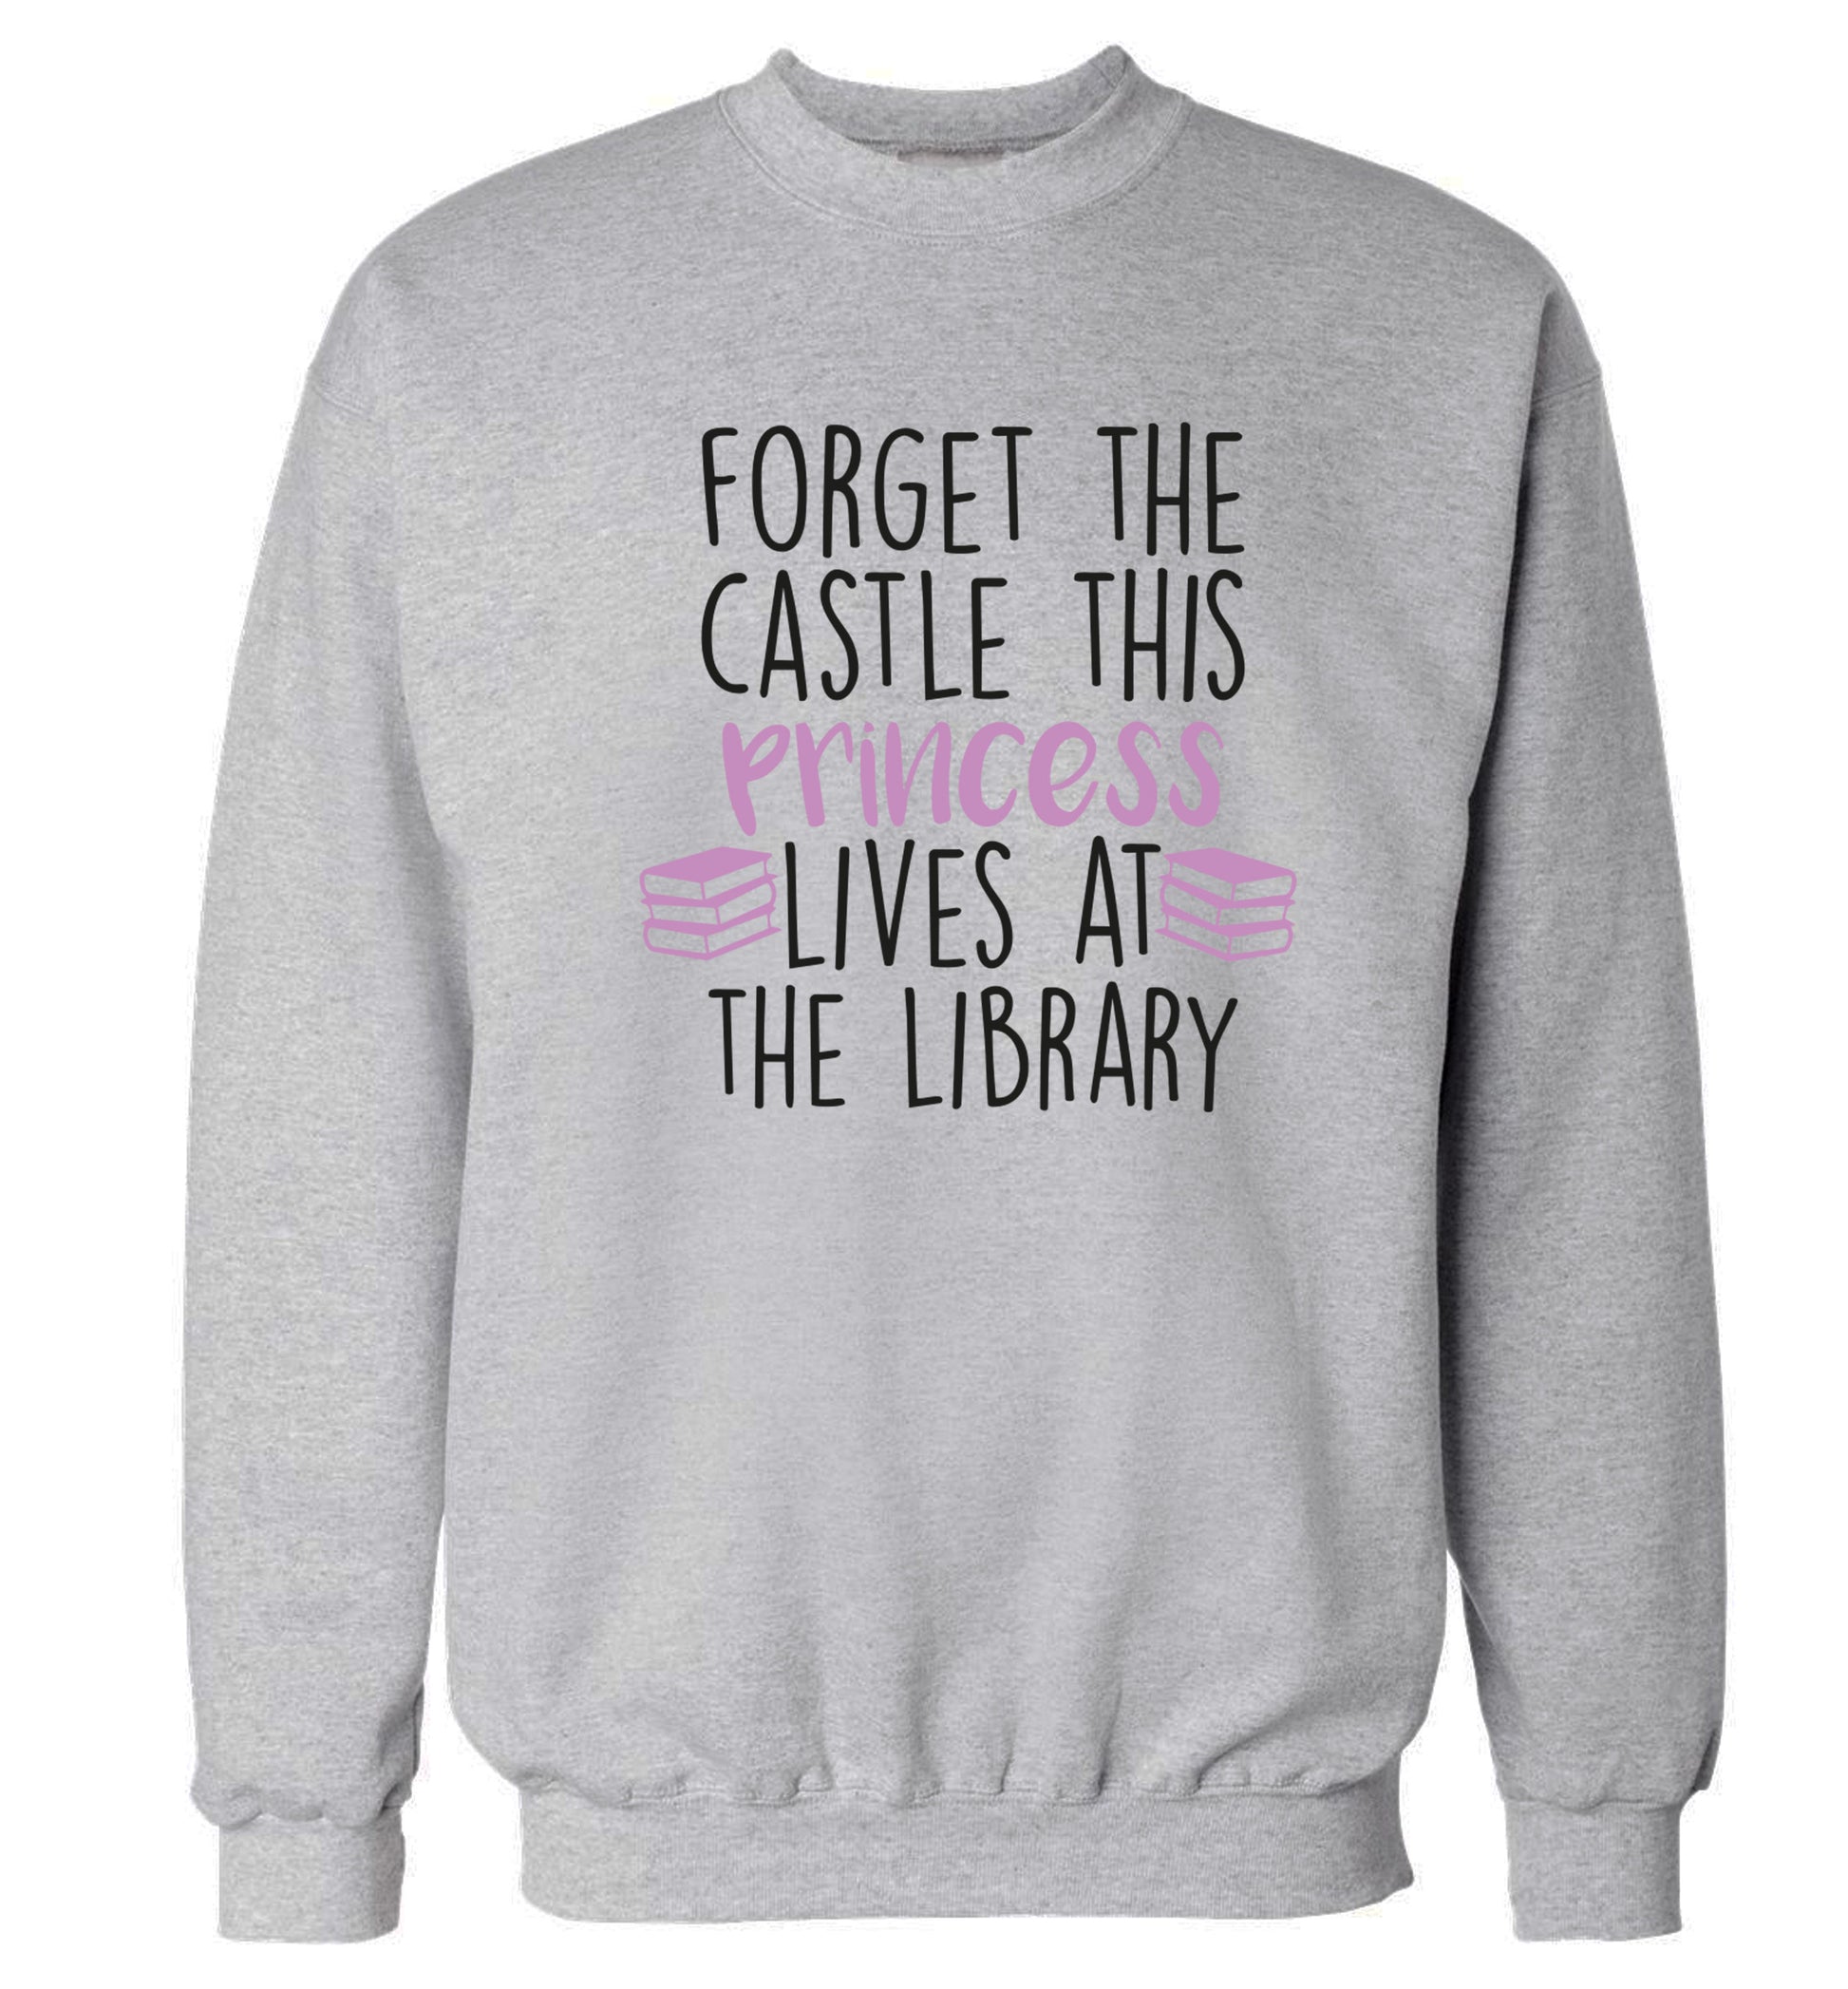 Forget the castle this princess lives at the library Adult's unisex grey Sweater 2XL